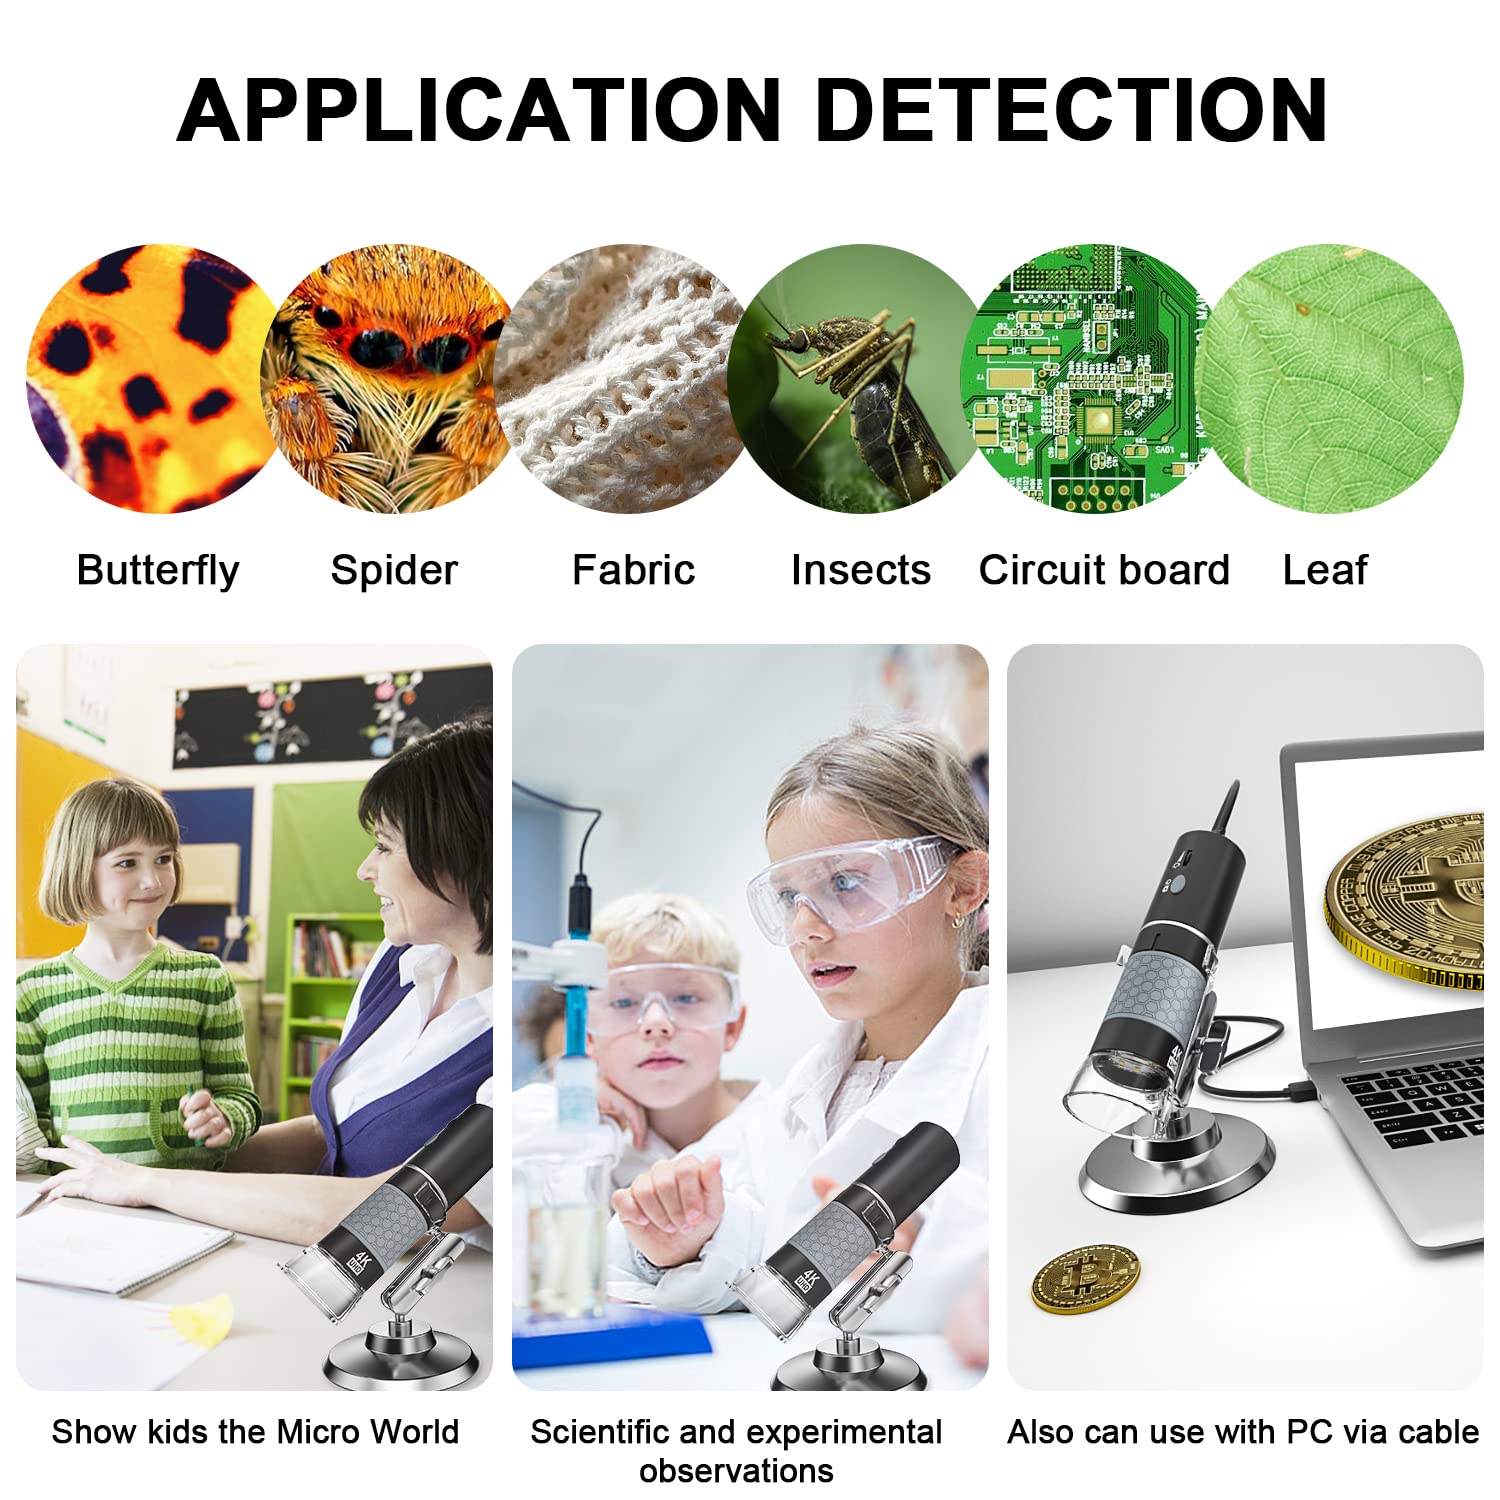 Bysameyee 4K 3840x2160P Wireless Digital Microscope, Handheld HD USB Inspection Camera Endoscope 50x-1000x Magnification, Compatible with iPhone iPad Android Phone Tablet Windows Mac (with Stand)